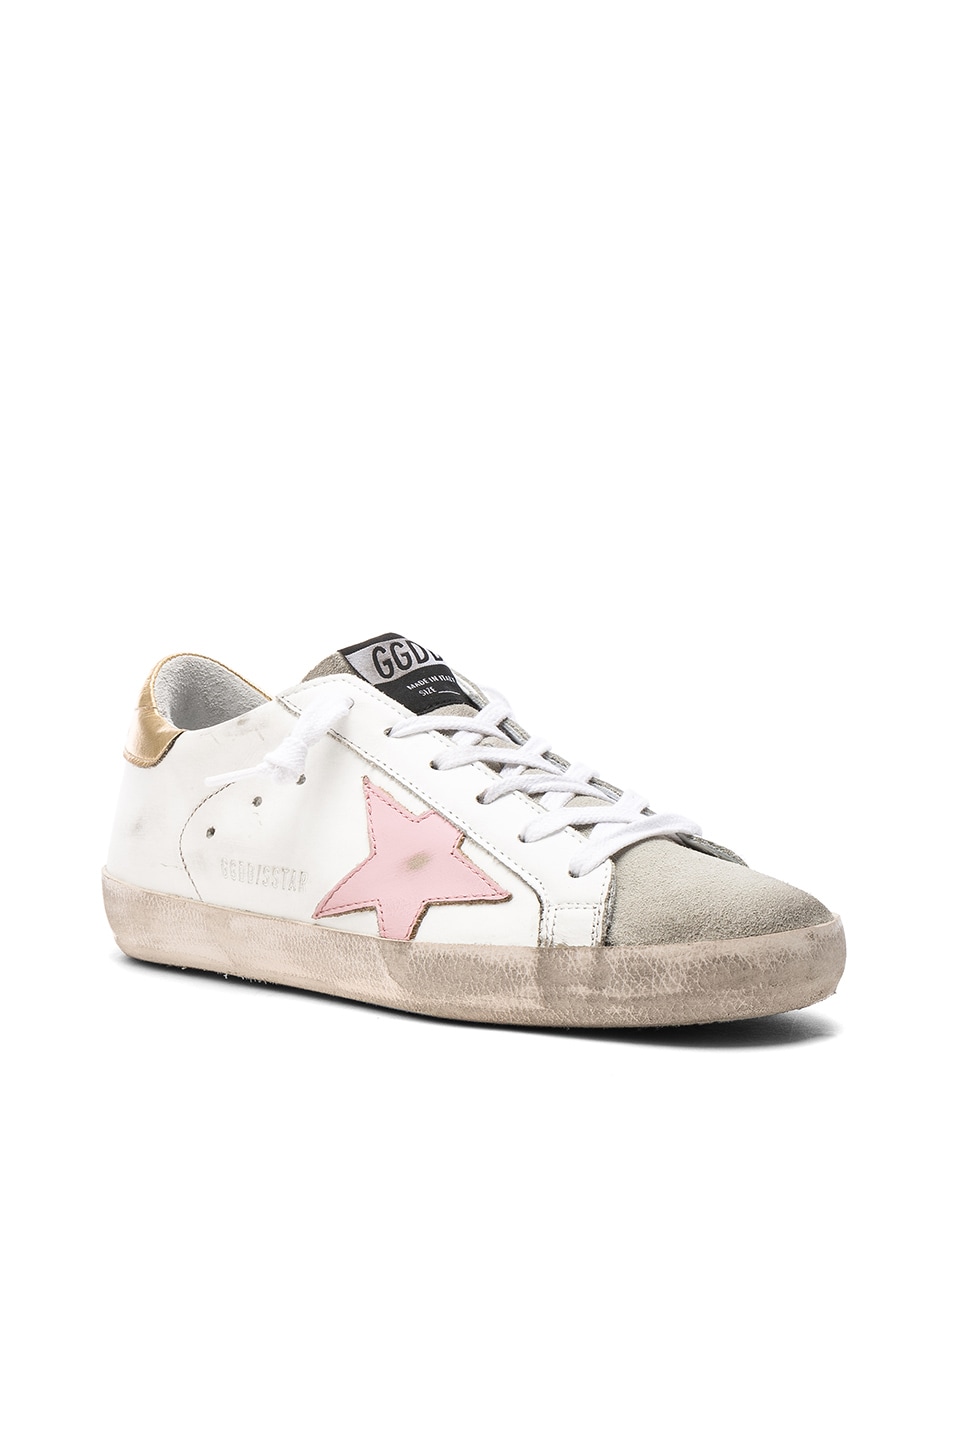 Golden Goose Superstar Sneakers in White, Gold & Pink | FWRD